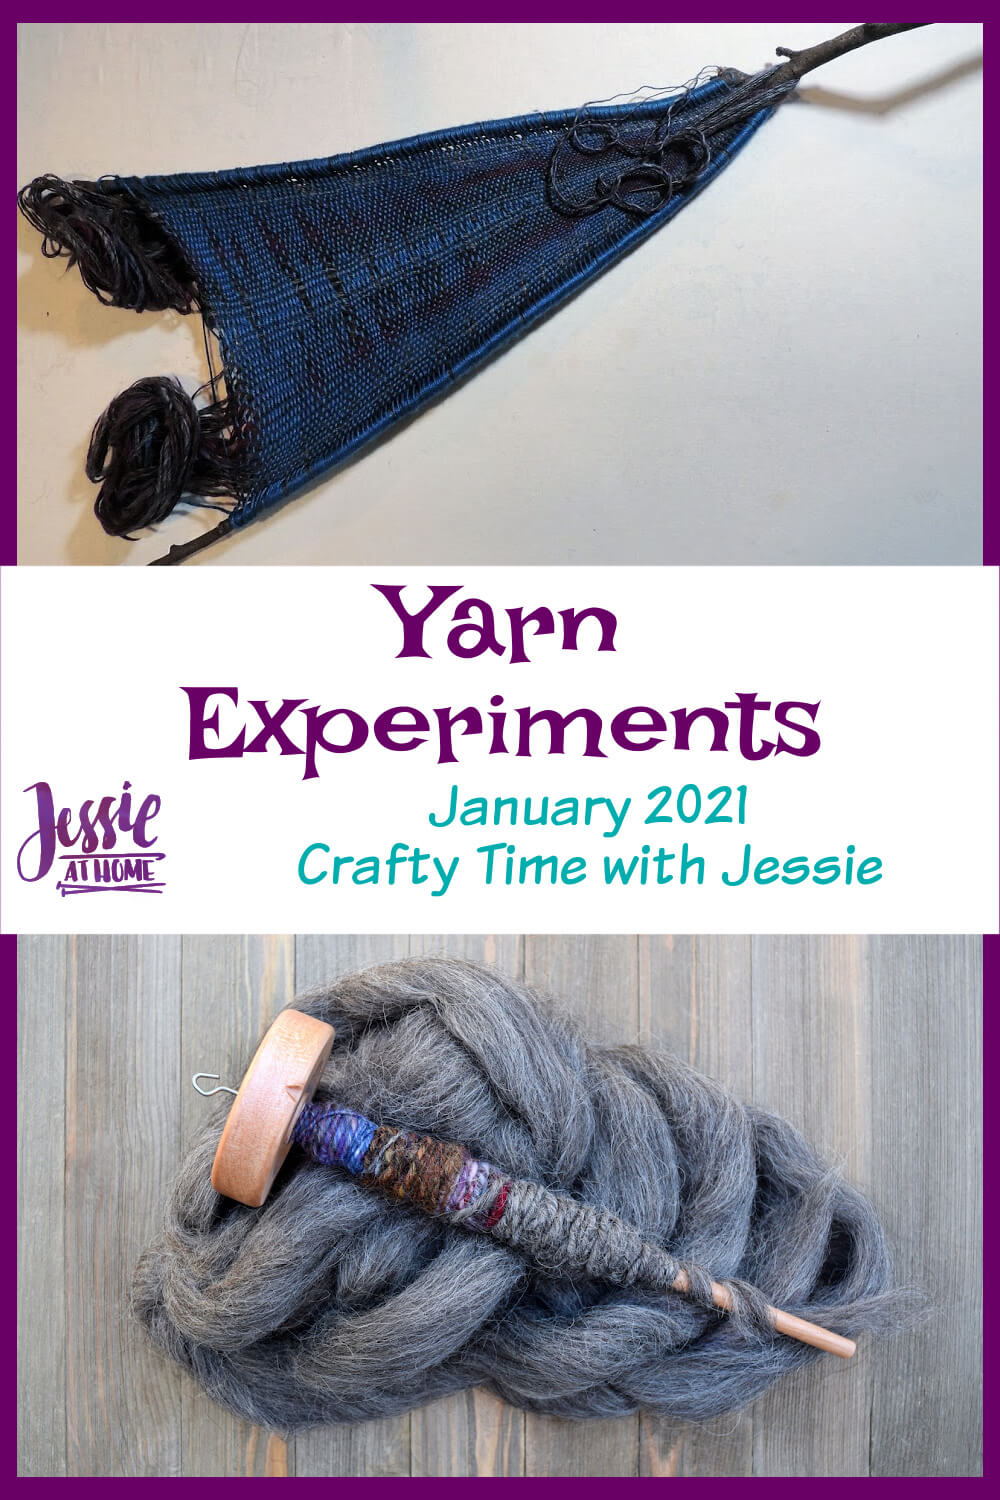 Yarn Experiments - January 2021 Crafty Time with Jessie